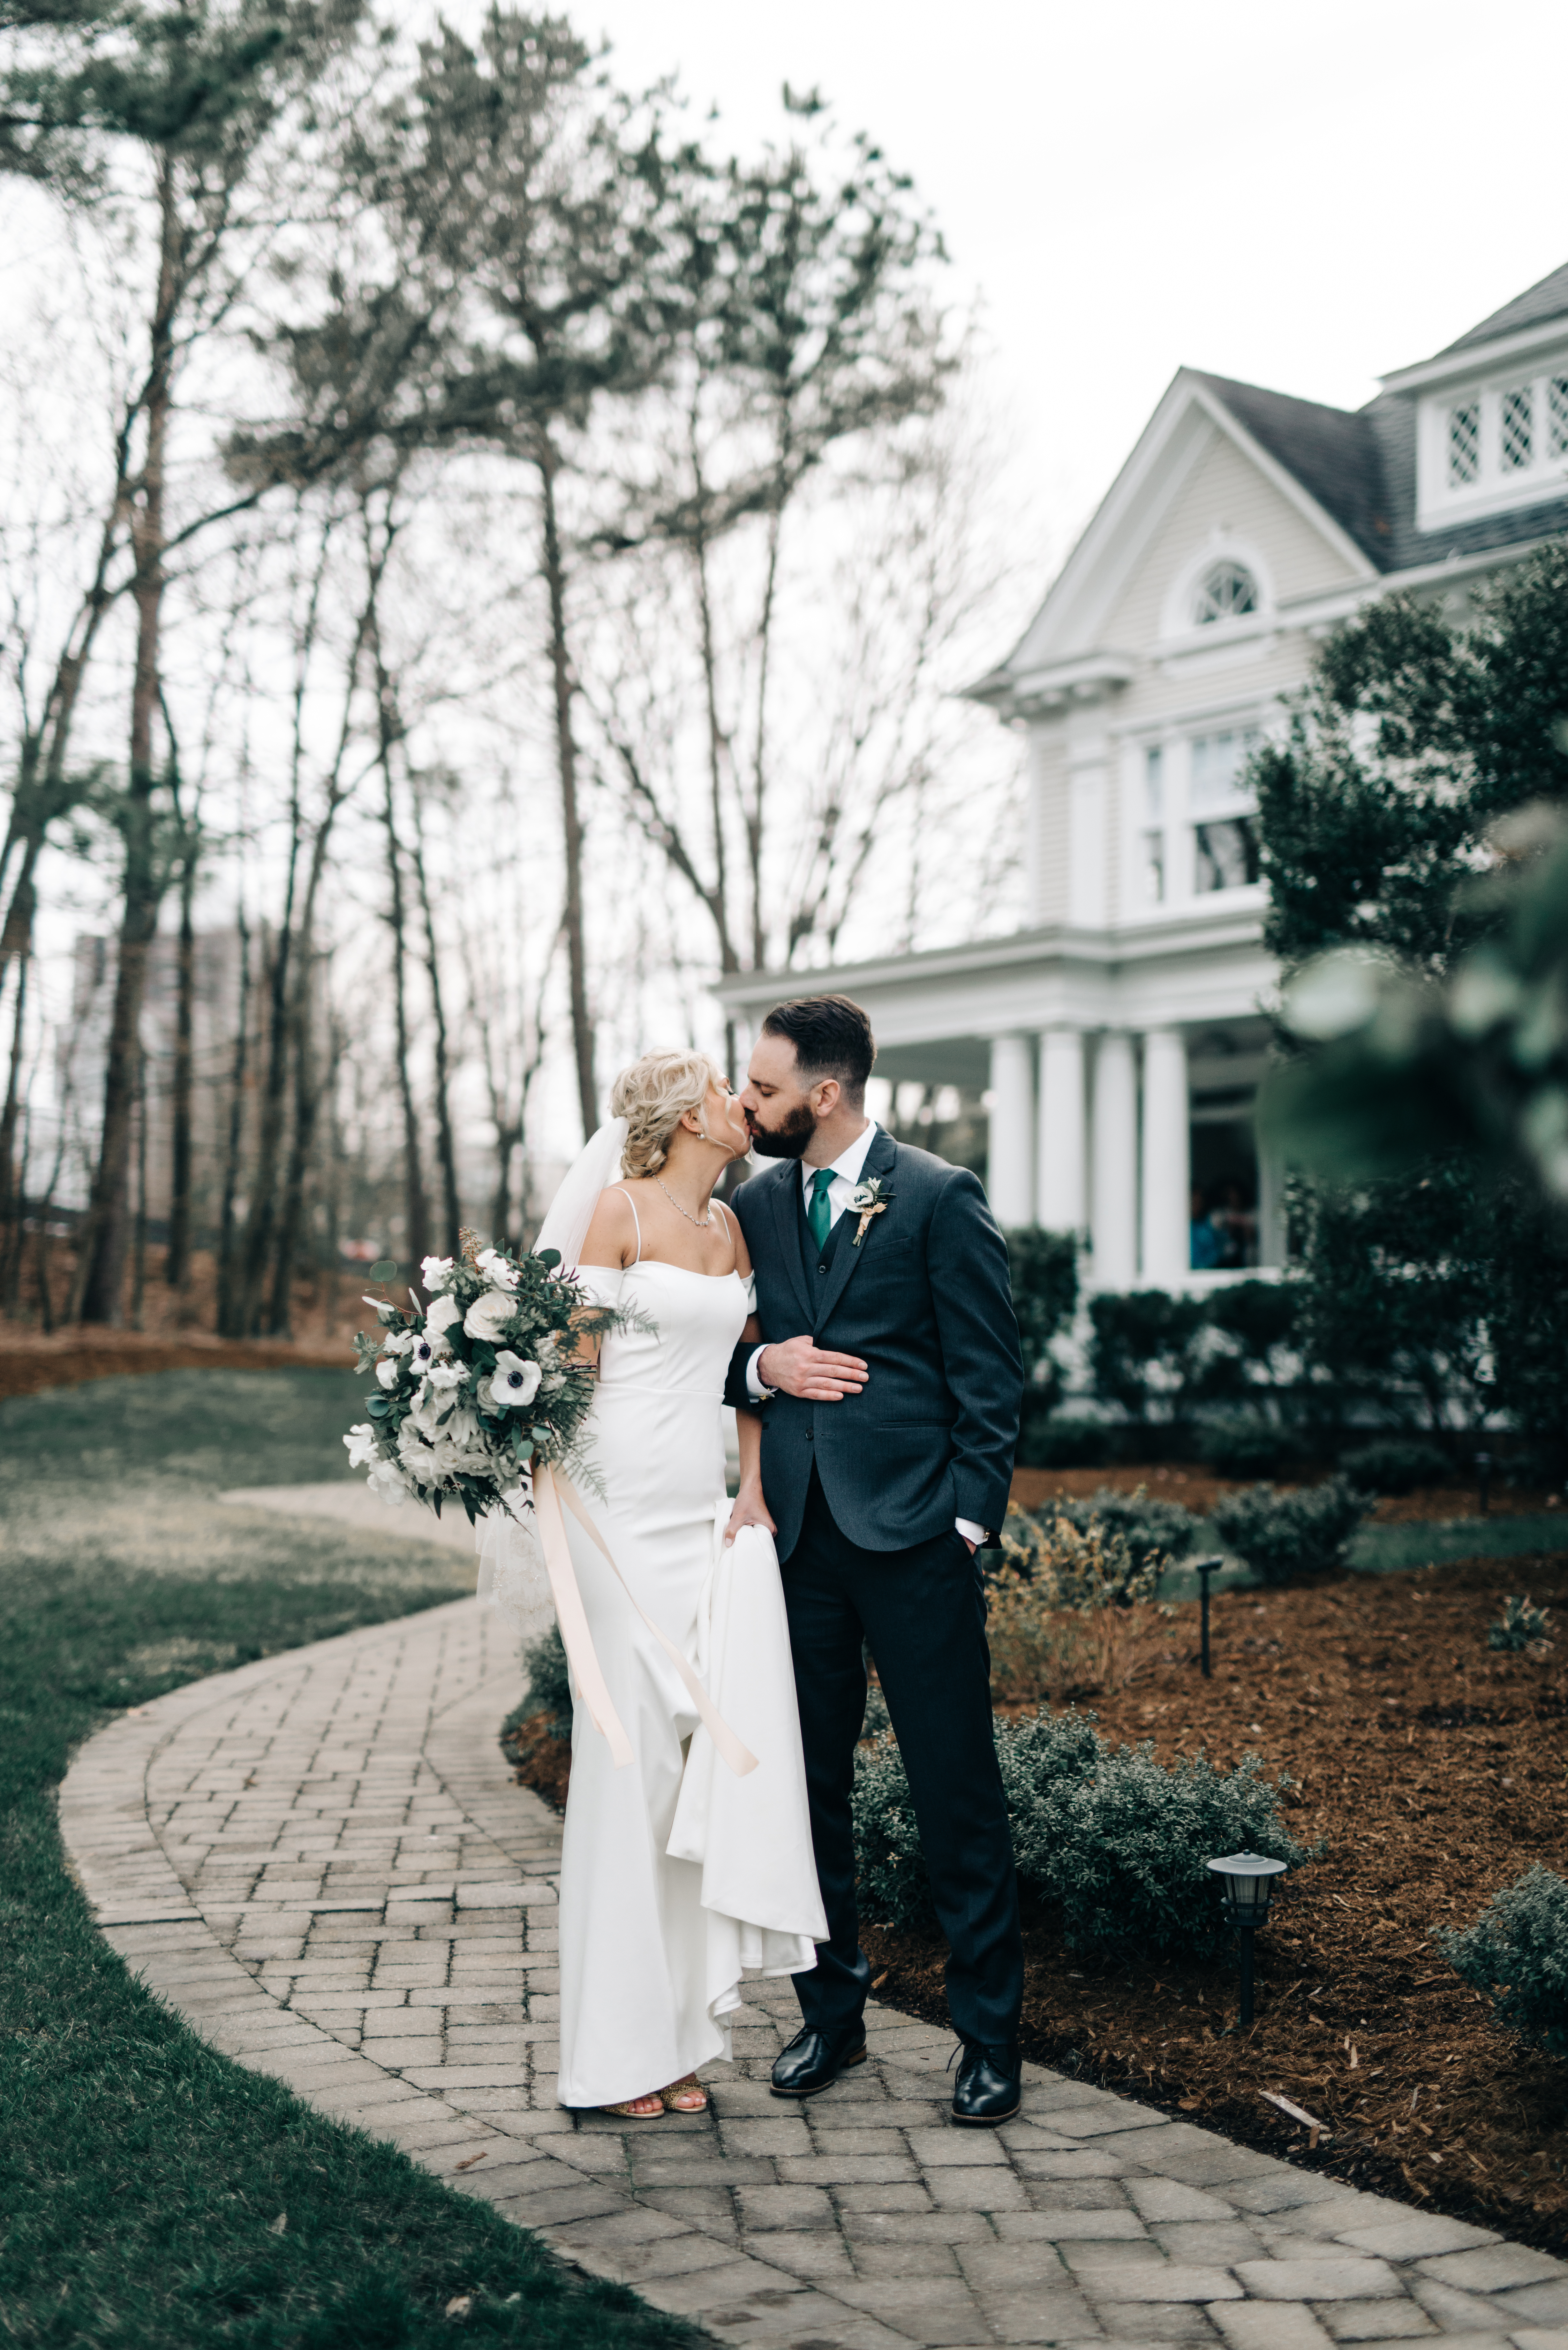 Emerald and gold wedding at McAlister-Leftwich House in Greensboro, NC.